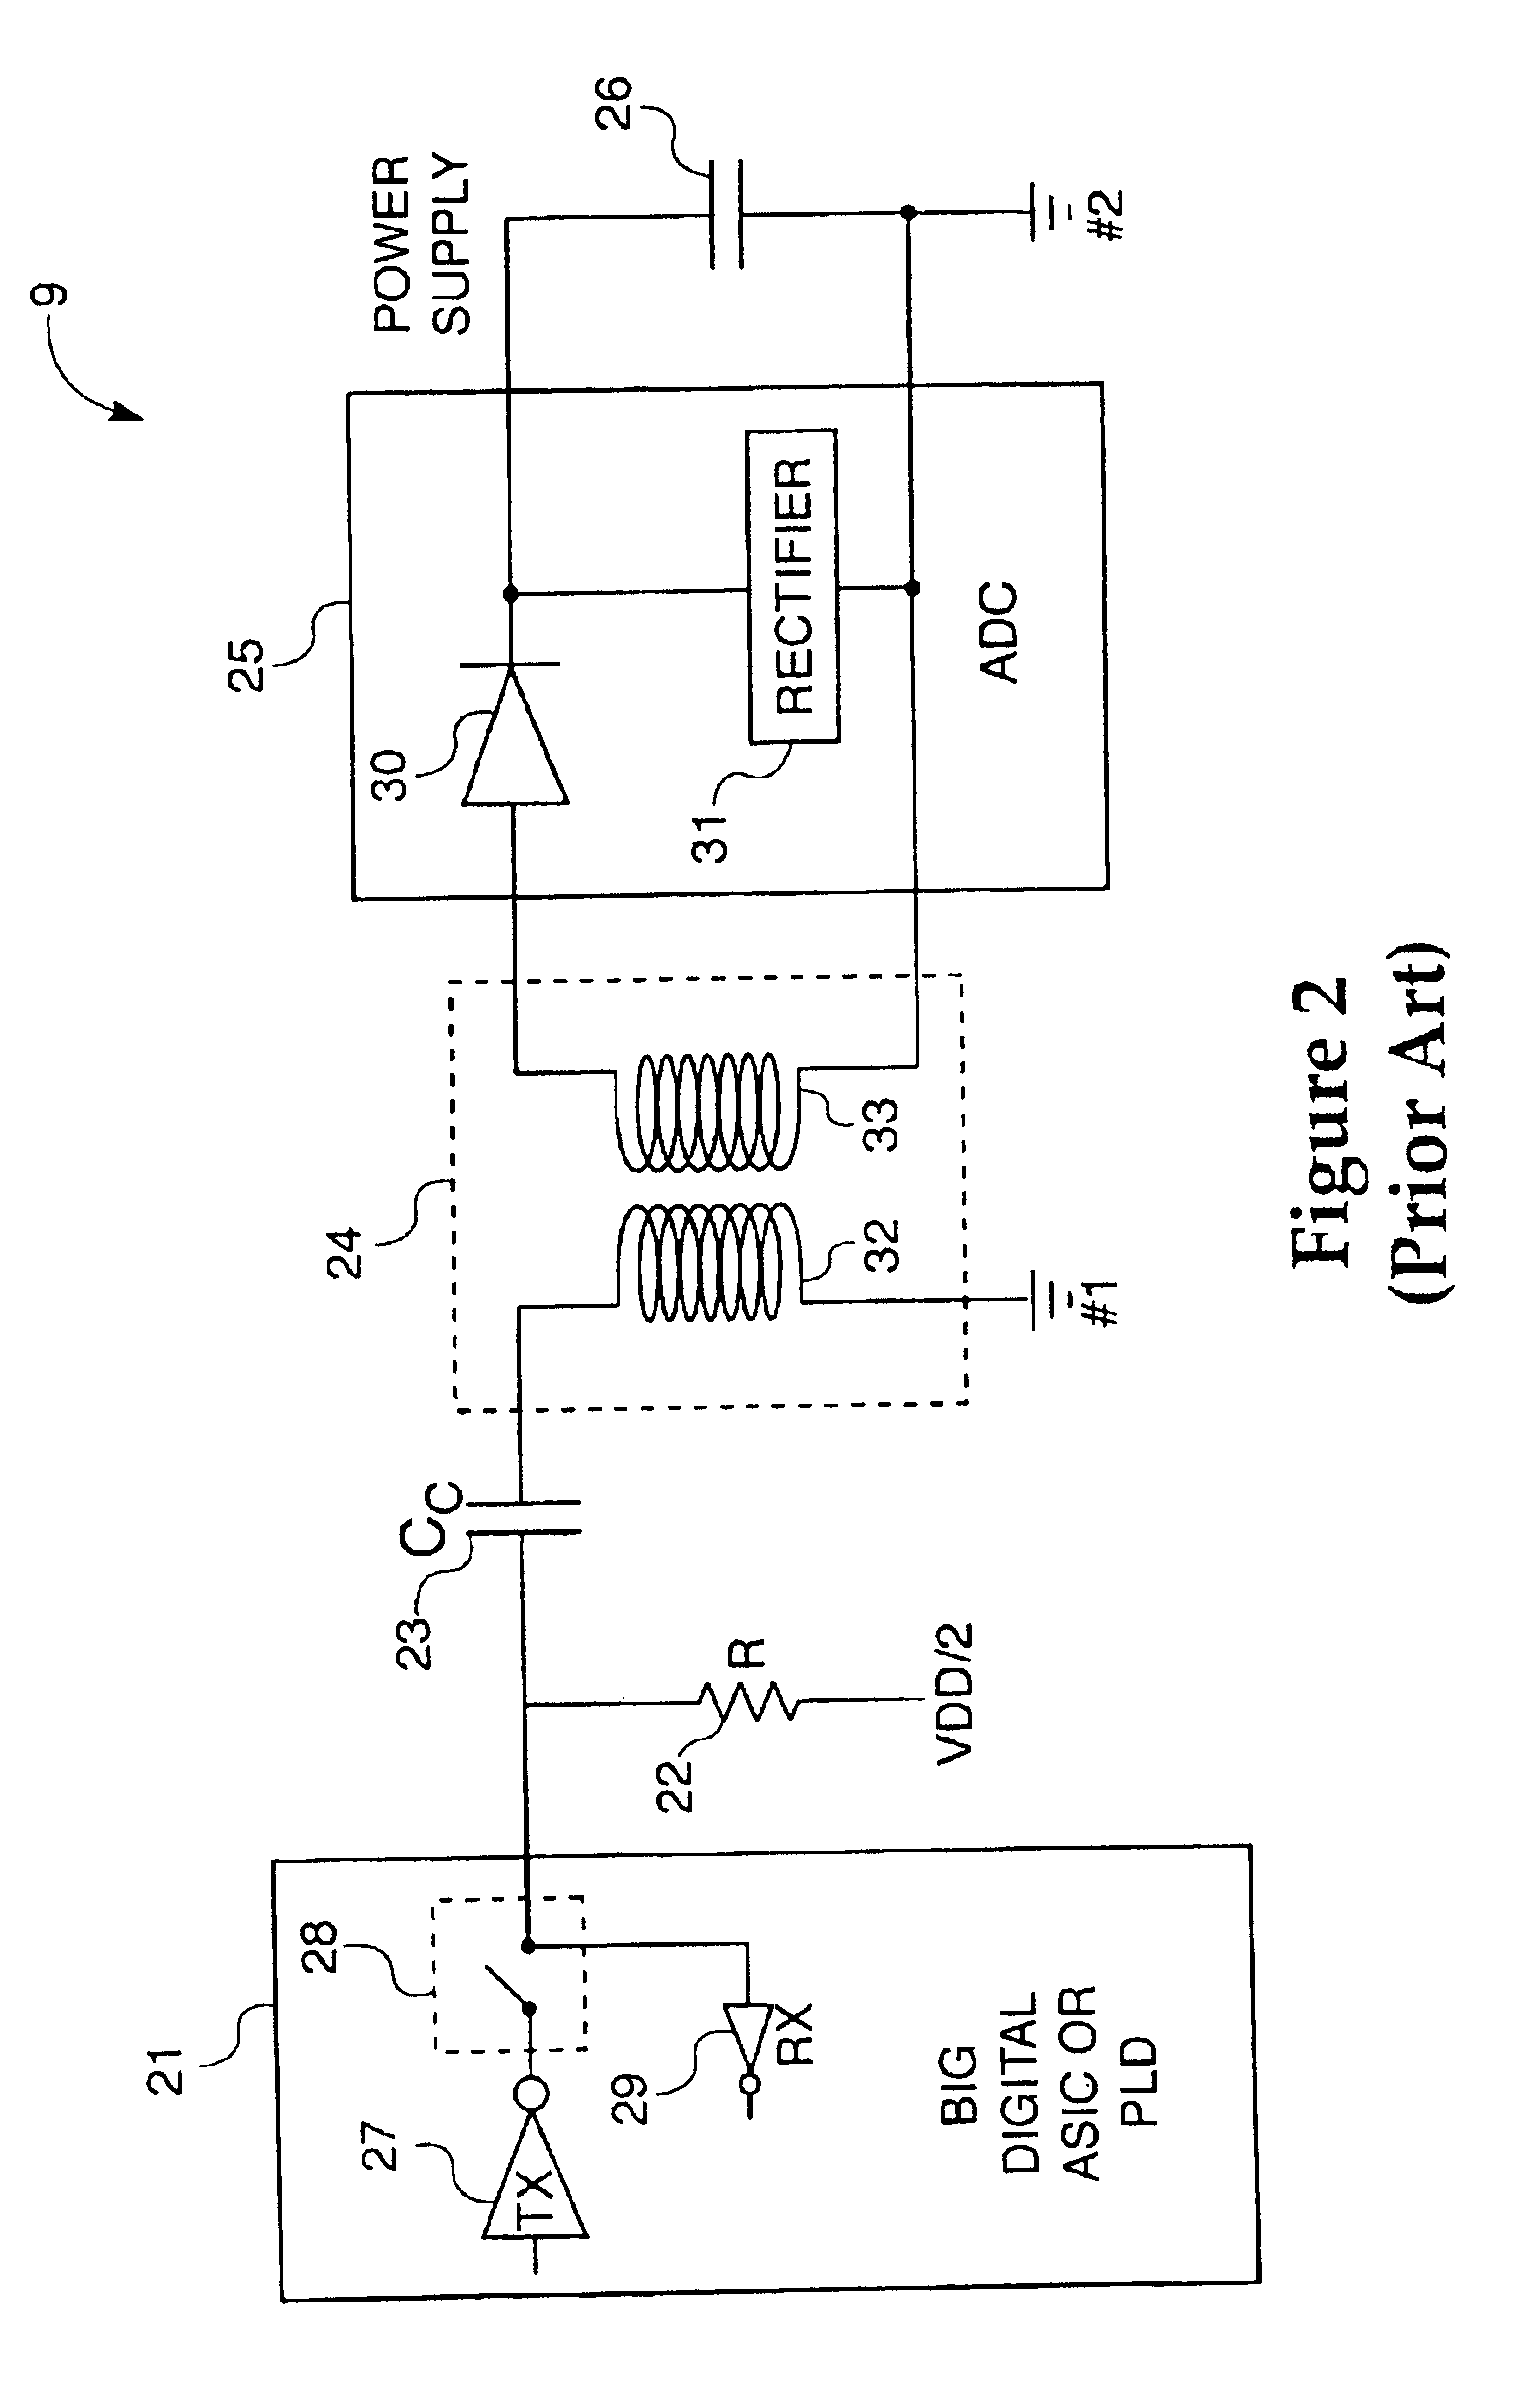 Calibration of isolated analog-to-digital converters